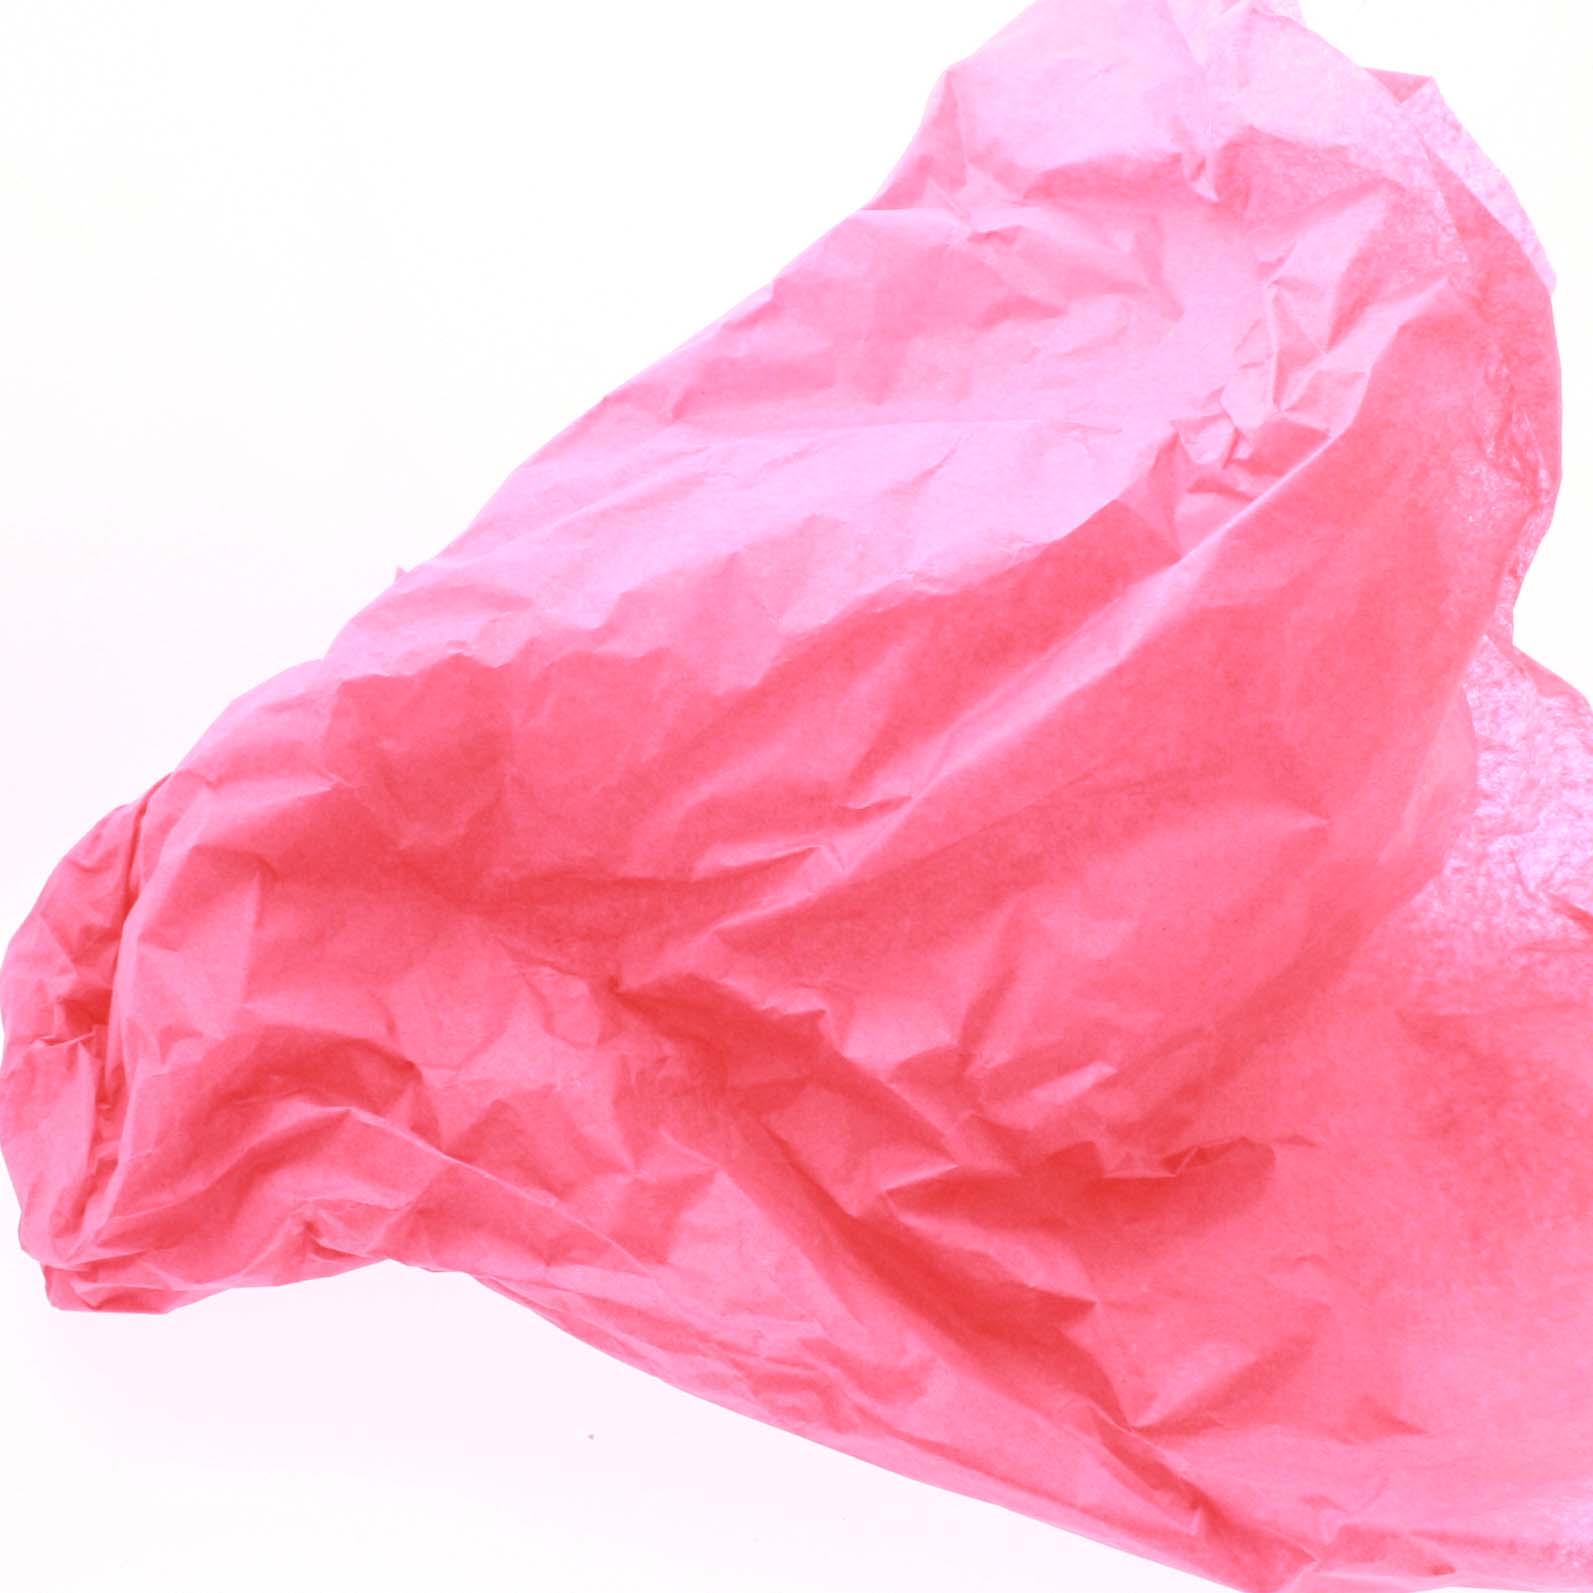 Bright PinkTissue Paper – The Curious Caterpillar